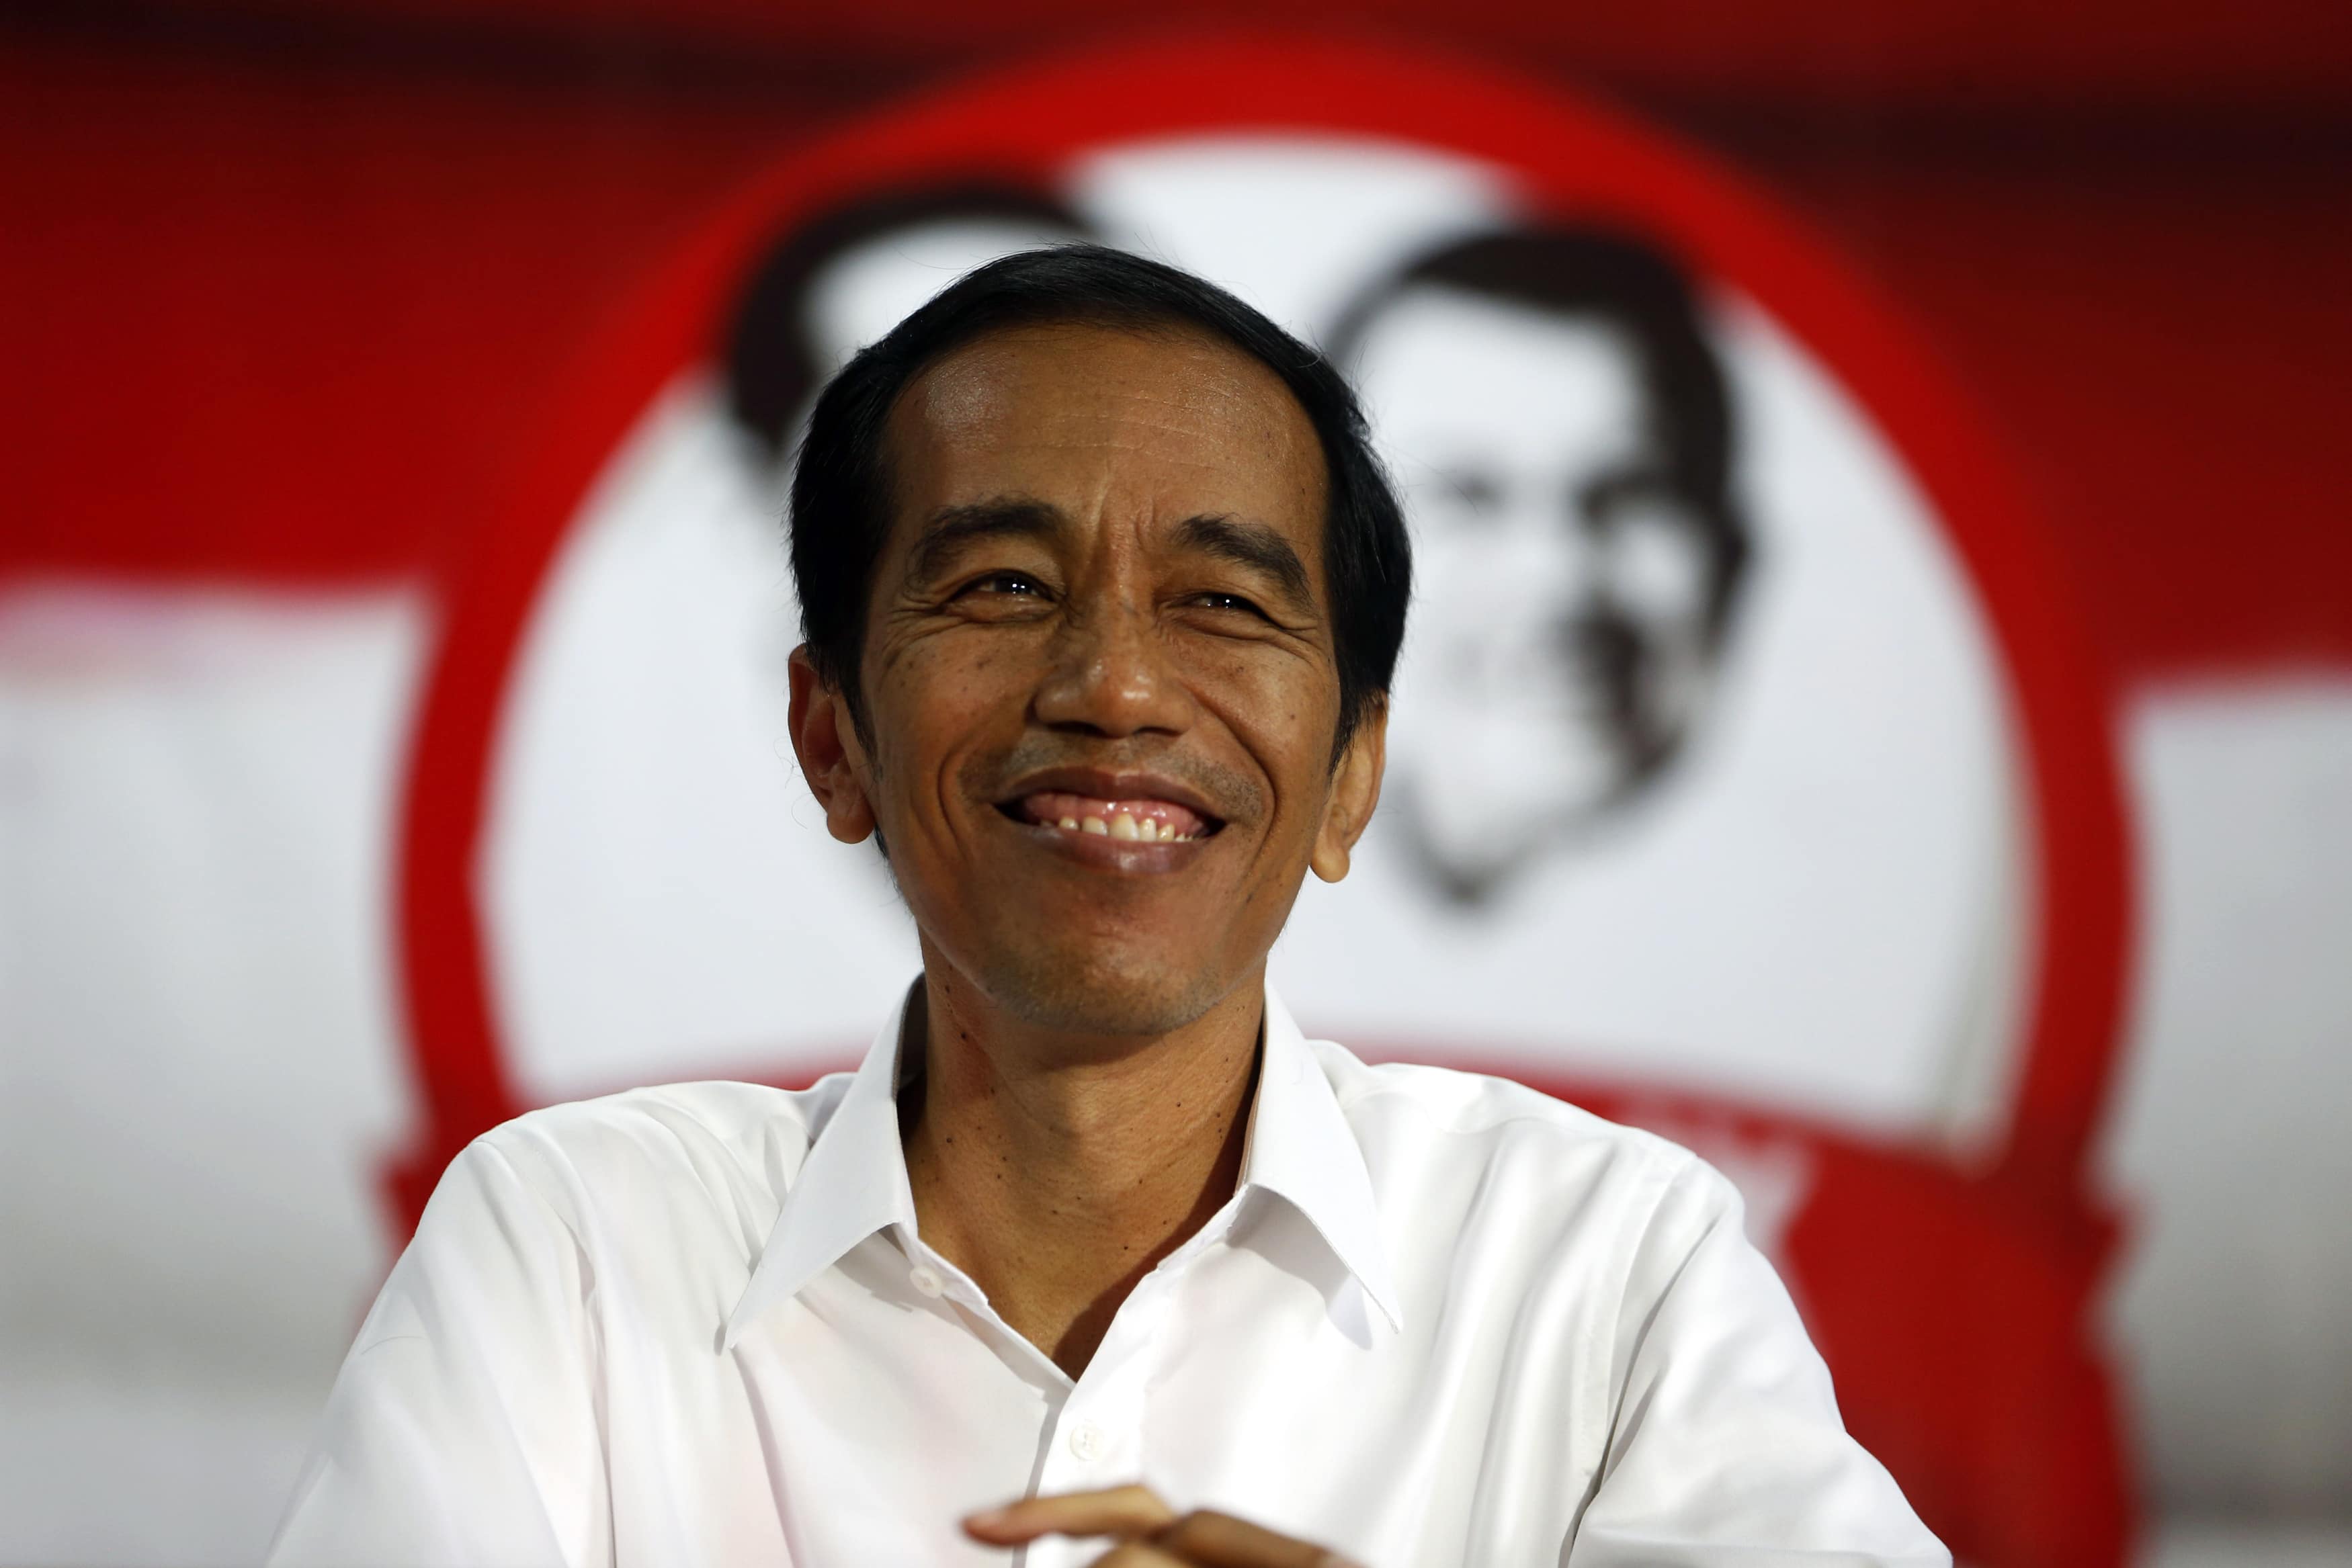 Then presidential candidate Joko Widodo smiles during a speech to his supporters in Serang, Indonesia's Banten province, 16 July 2014, REUTERS/Beawiharta